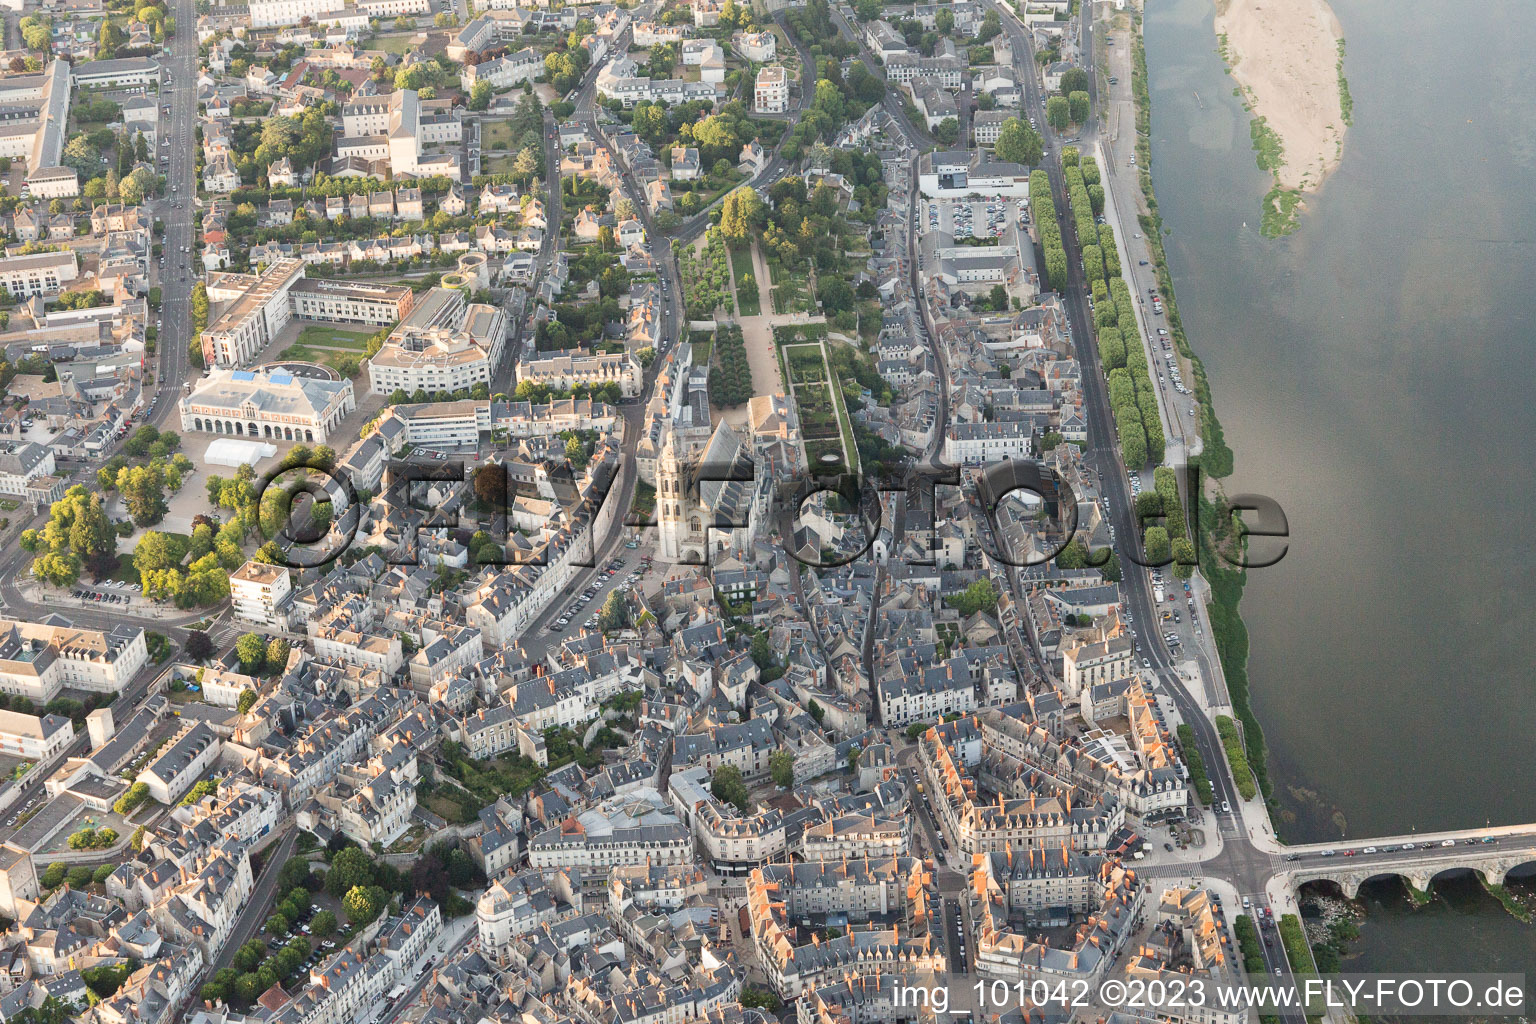 Blois in the state Loir et Cher, France from the drone perspective